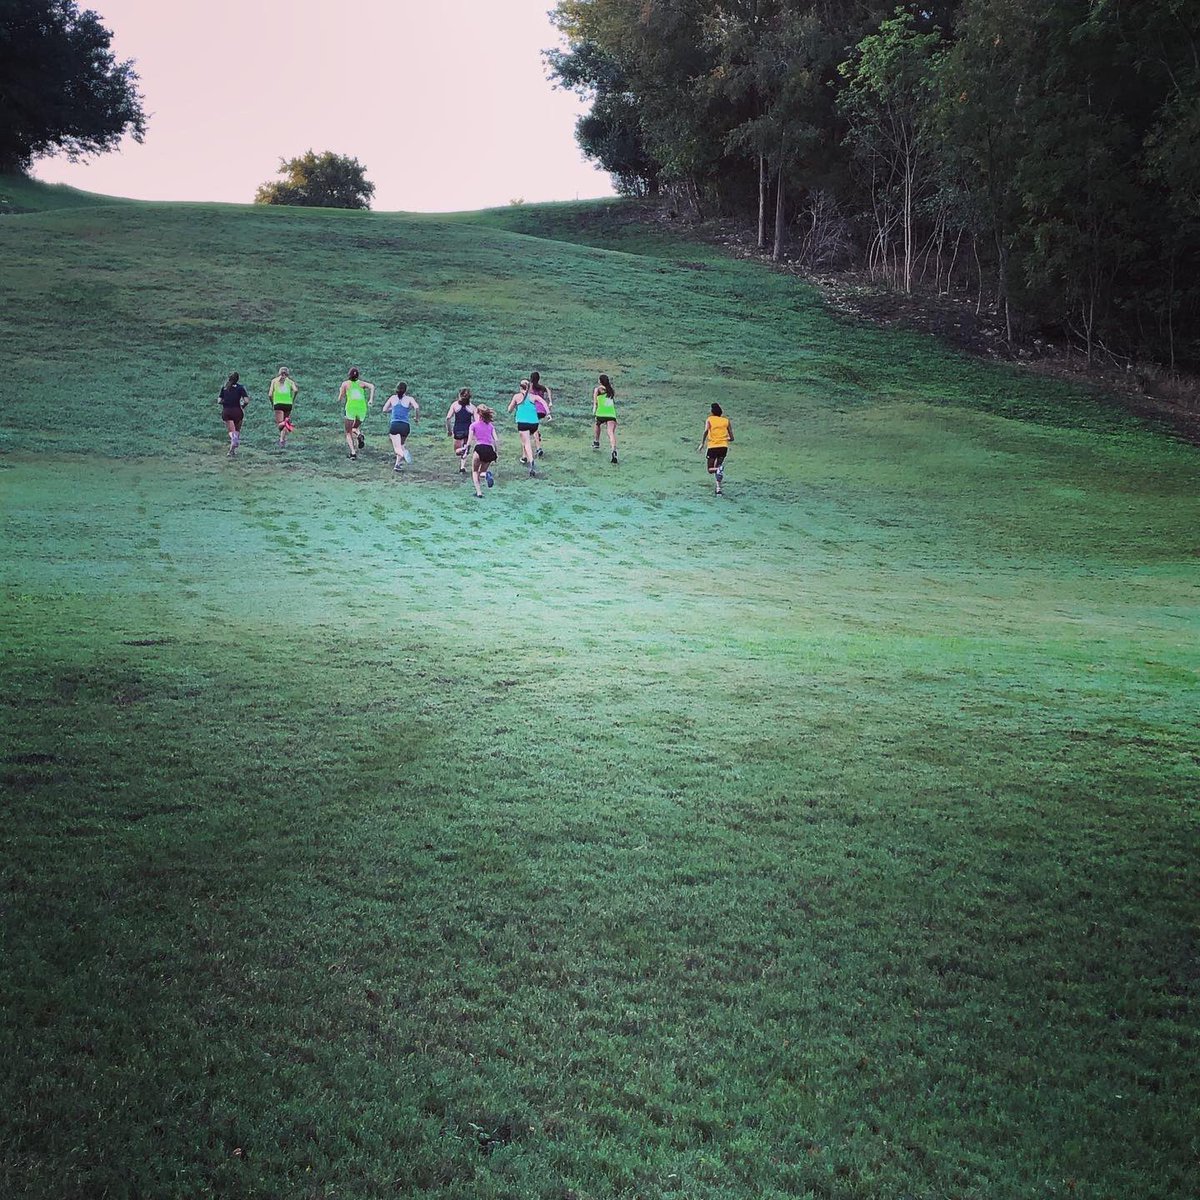 Where were you when the sun came up?? #hillsforbreakfast #ChasingExcellence